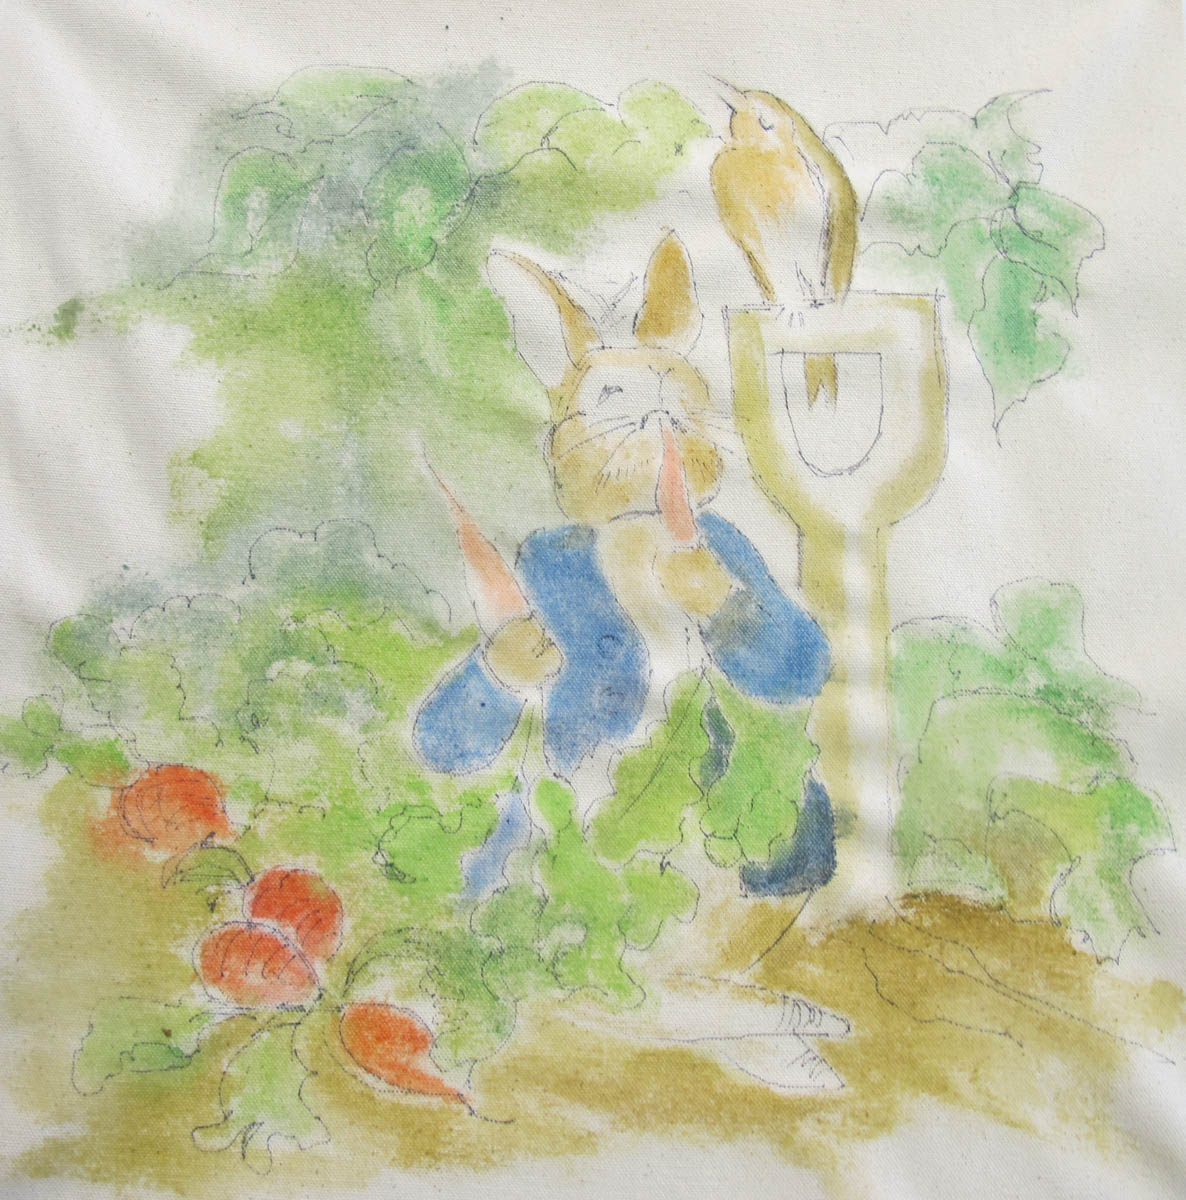 Peter Rabbit Wall Hanging - painting step 4